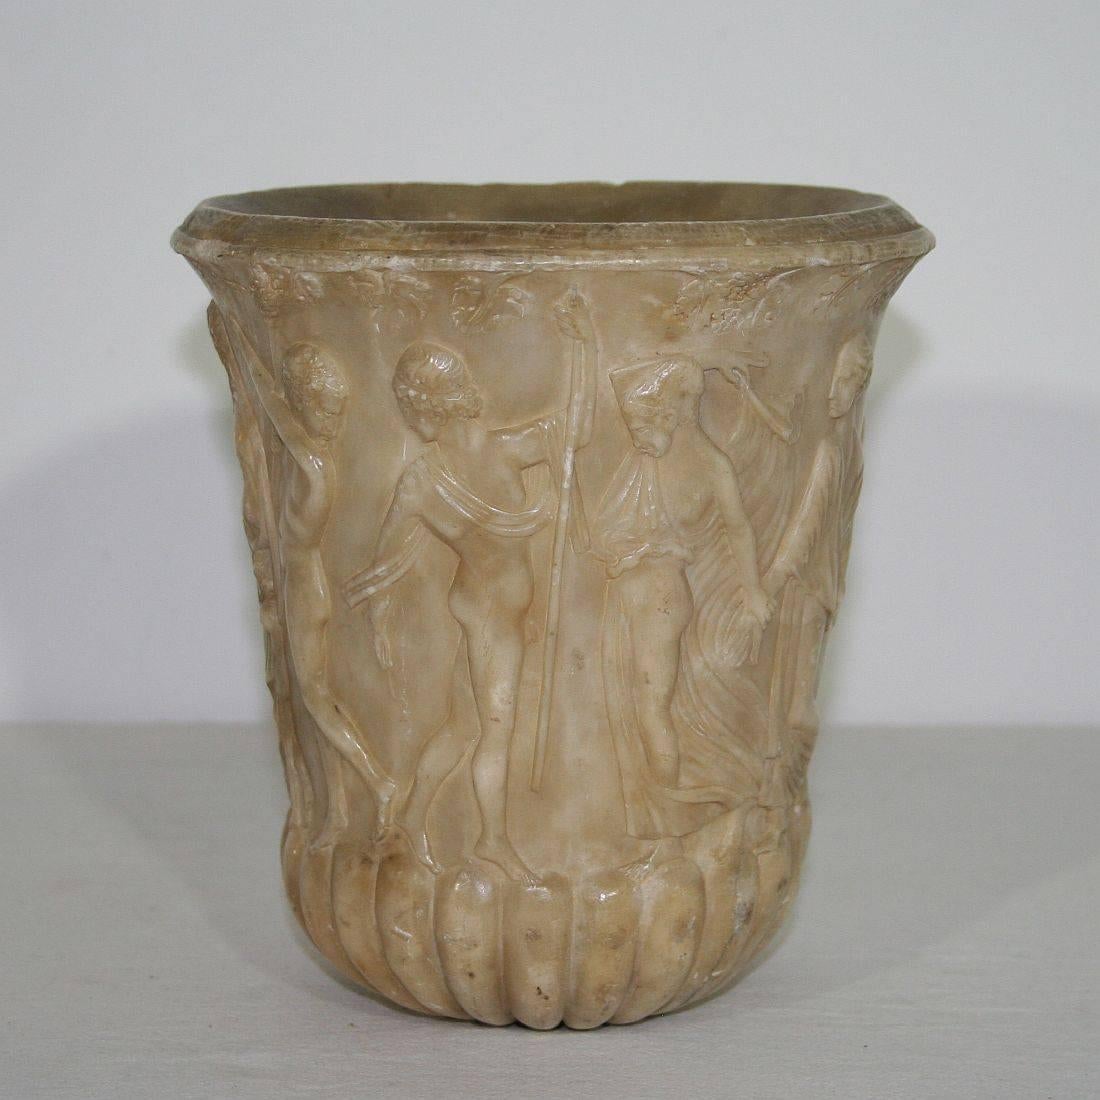 Stunning and unique fragment of an alabaster vase with very detailed beautiful scenery. Probably Grand Tour
Italy, 18th century
Weathered, losses and old repair.
More pictures are available on request.